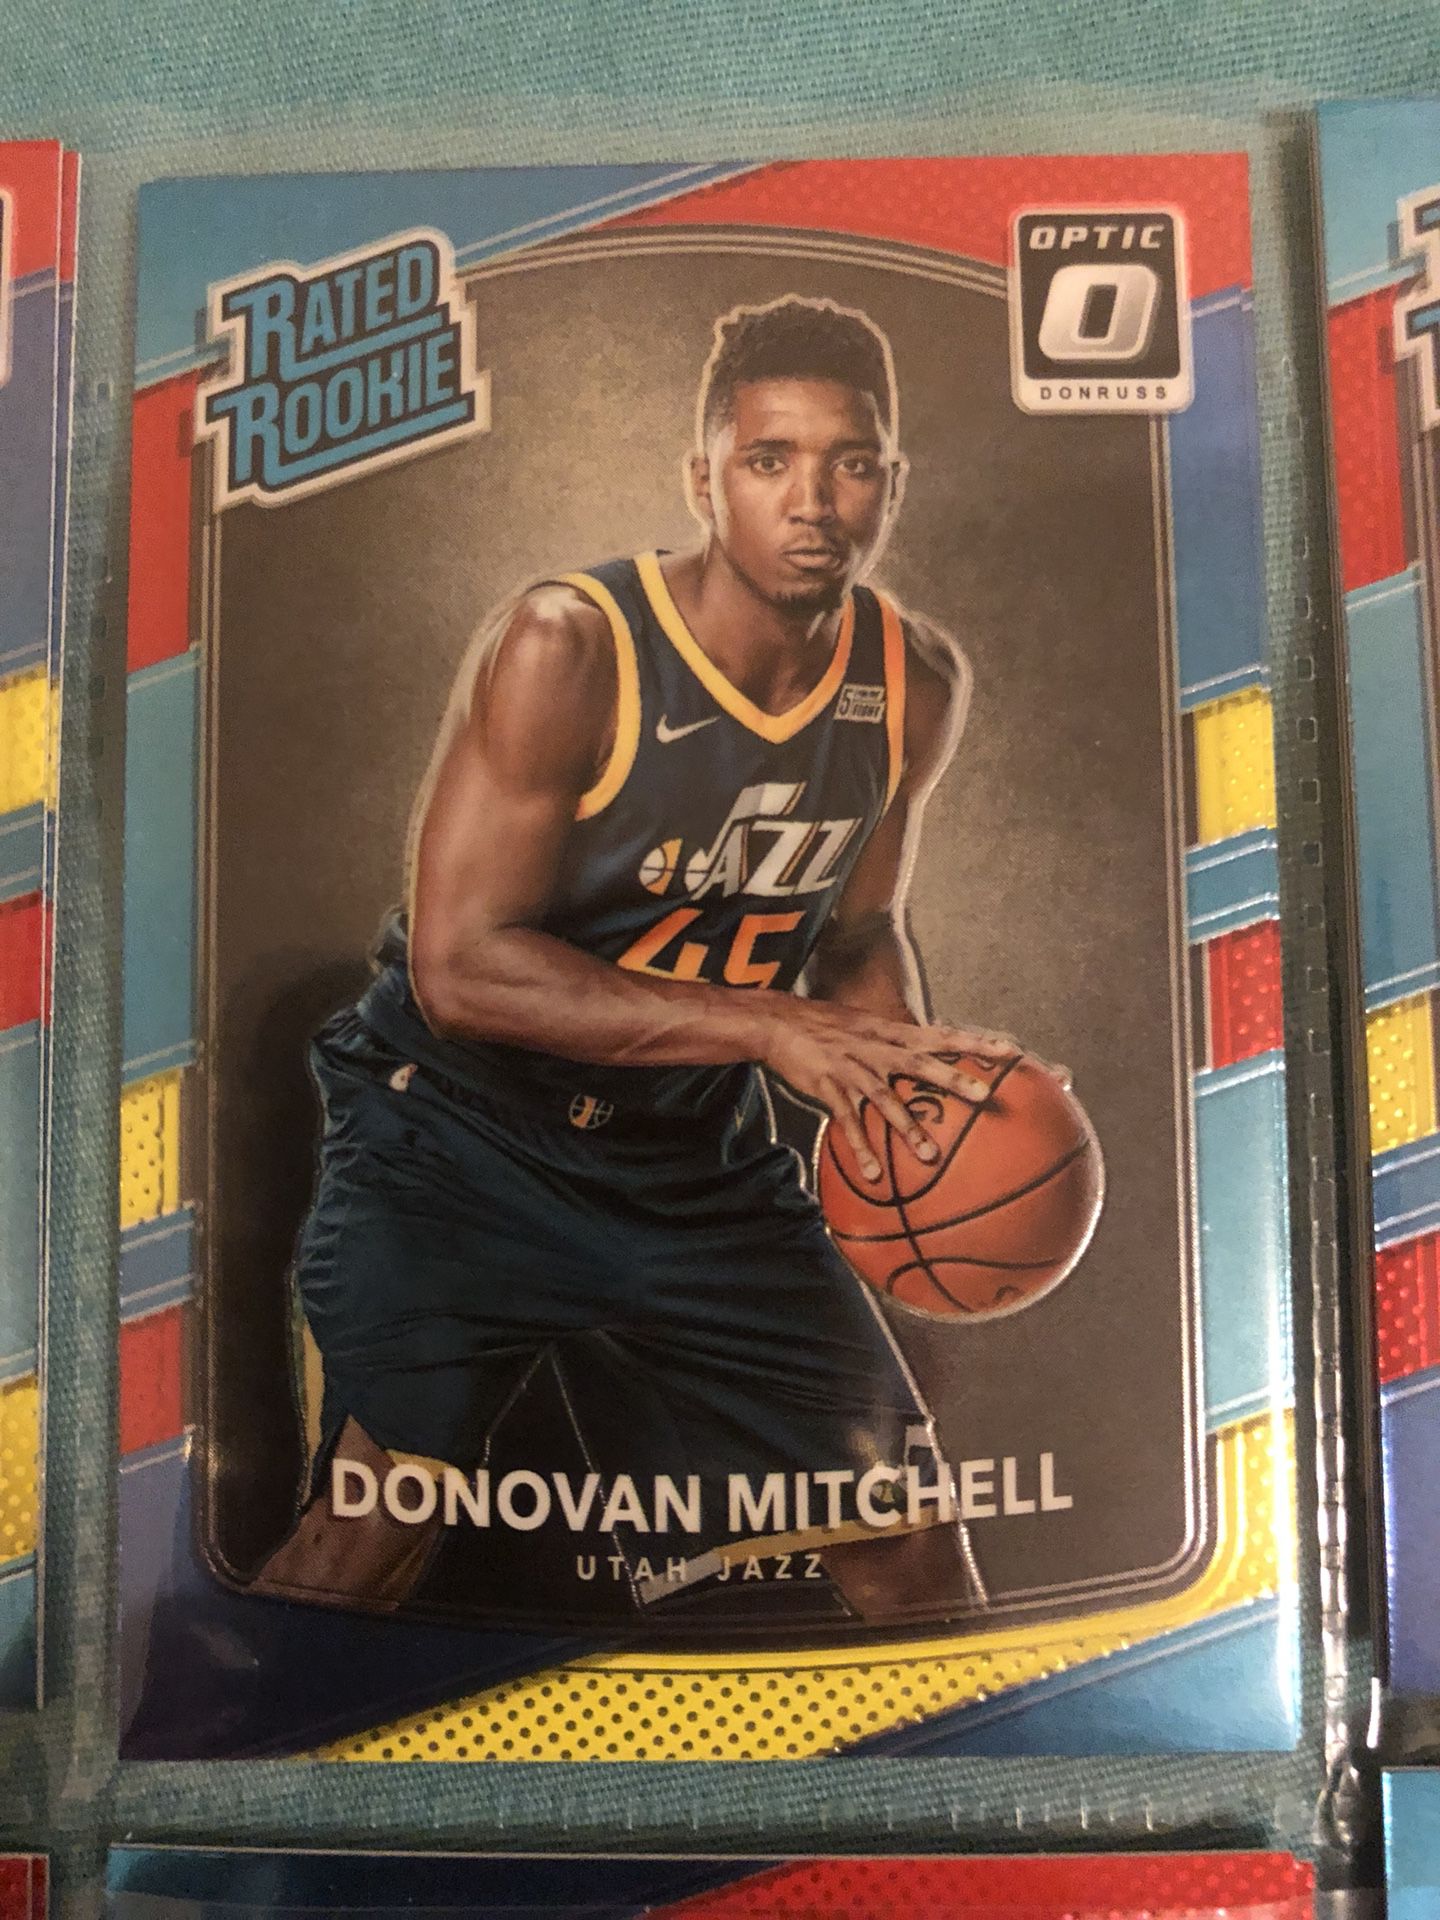 2017-18 Panini Donruss Optic Red & Yellow Rated Rookie Donovan Mitchell Holo